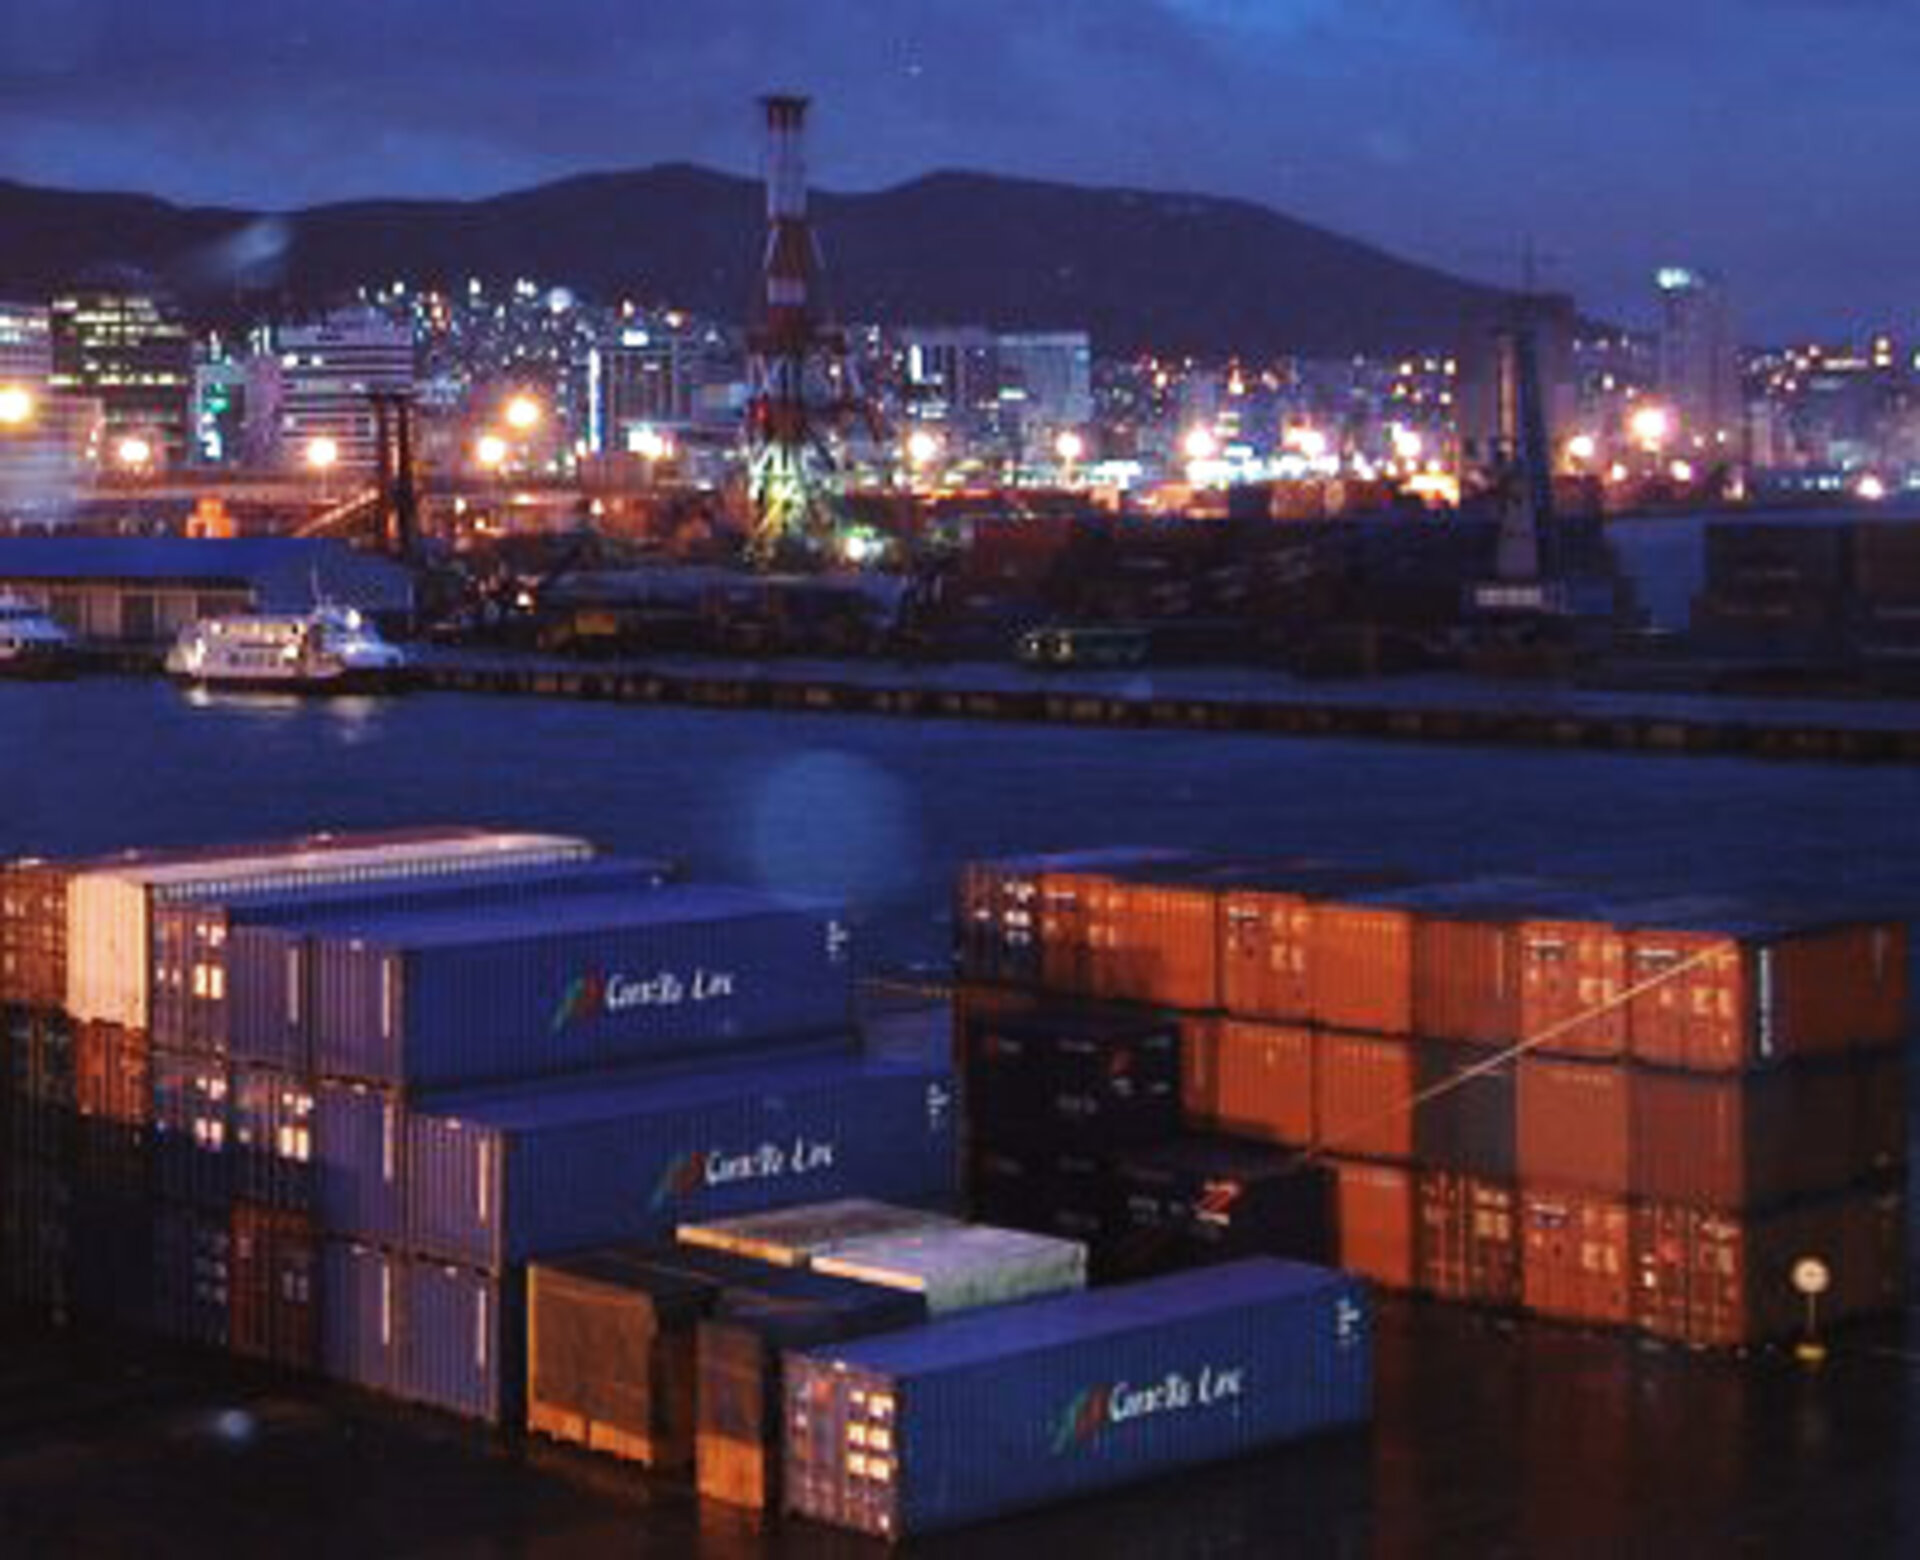 Containers in harbour